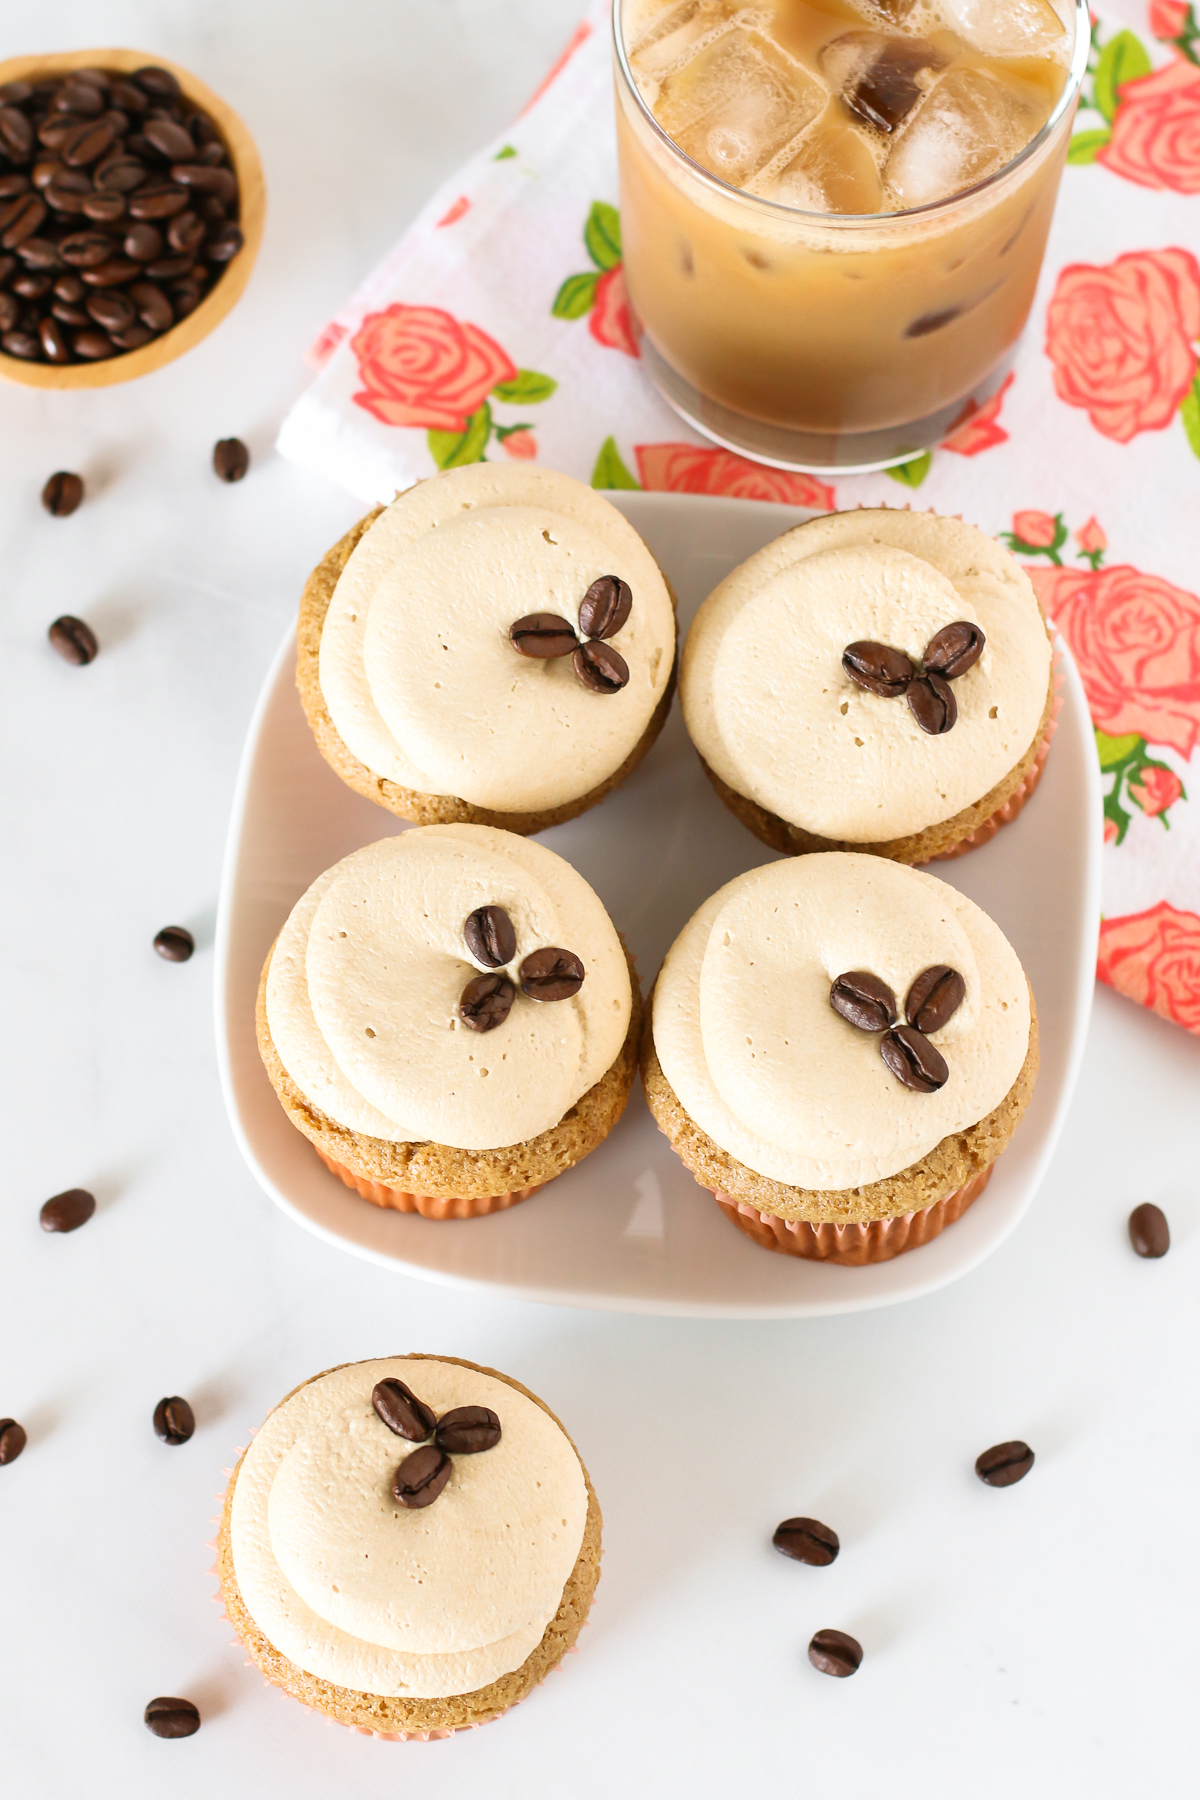 Gluten Free Vegan Vanilla Latte Cupcakes. All you coffee lovers, you are going to adore these fluffy vanilla latte cupcakes!